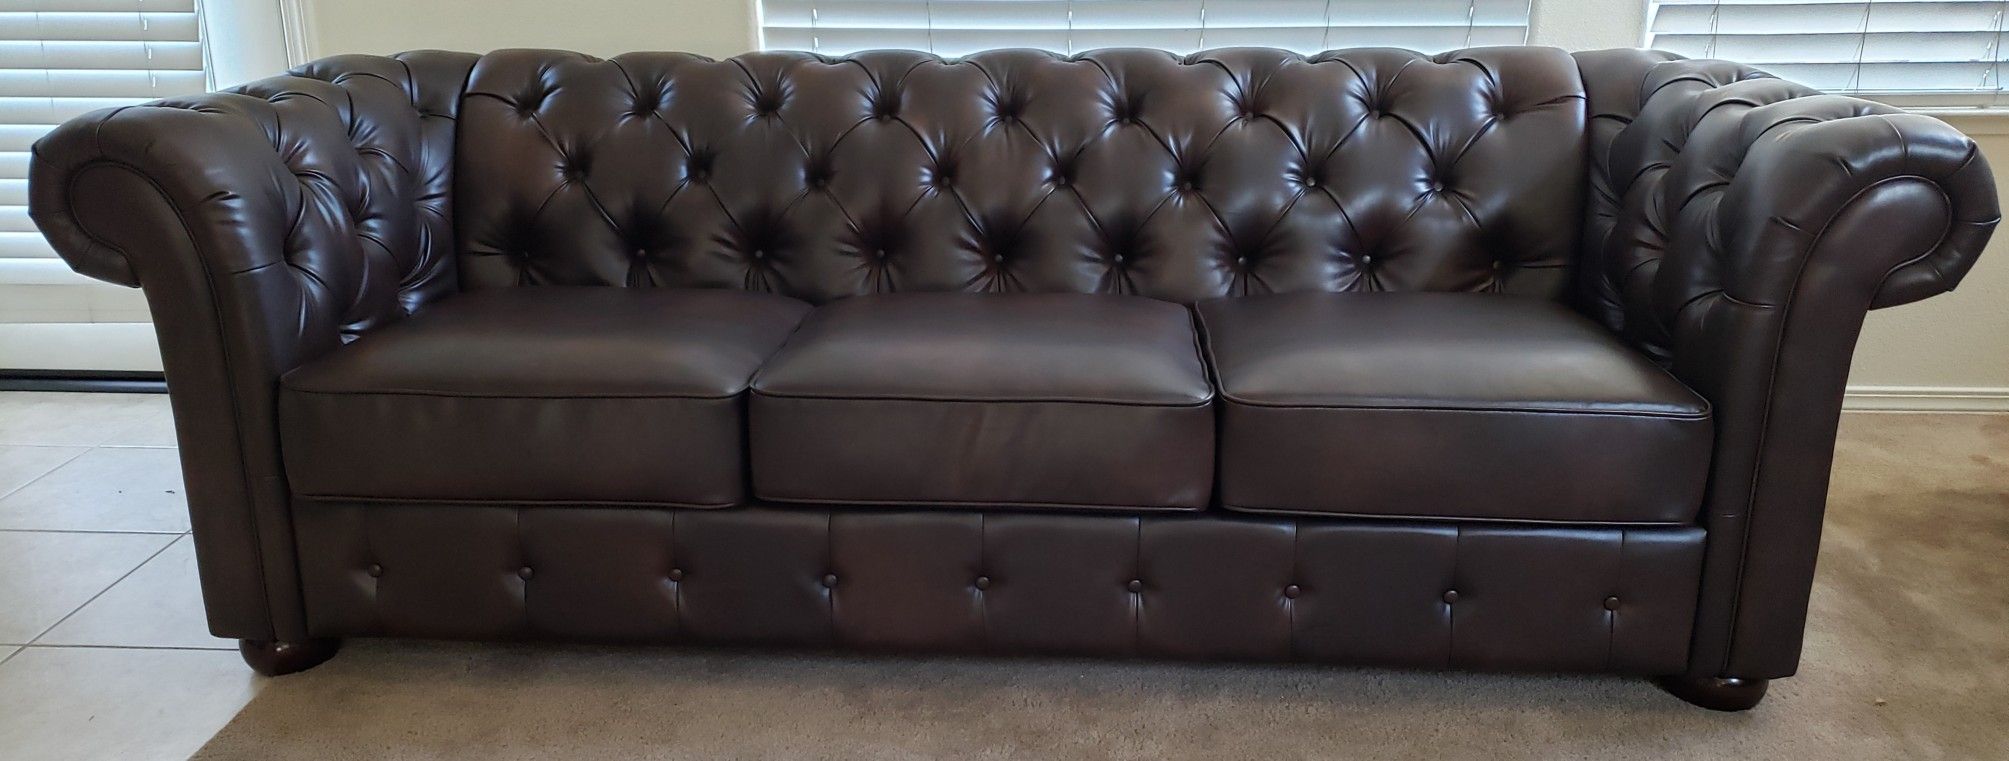 New Brown Couch